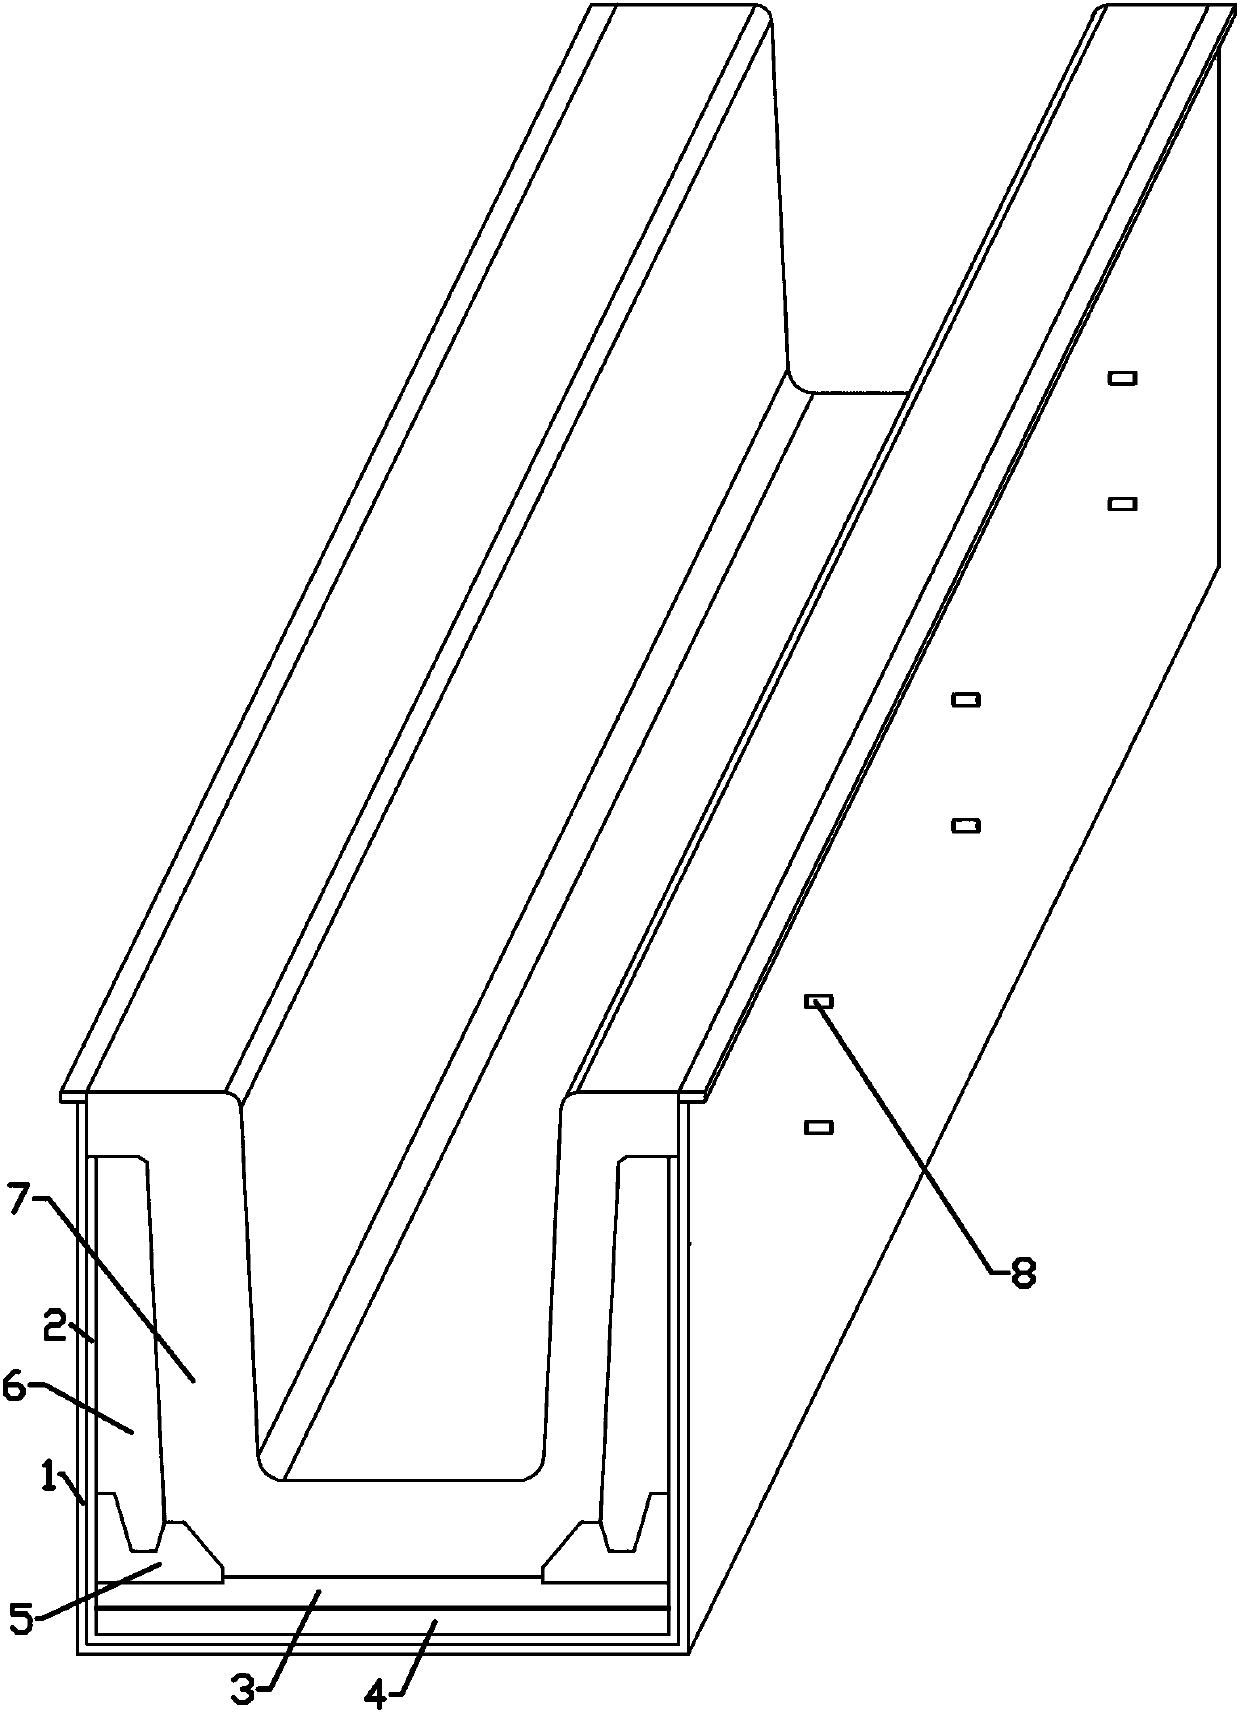 Prefabricated iron tap channel